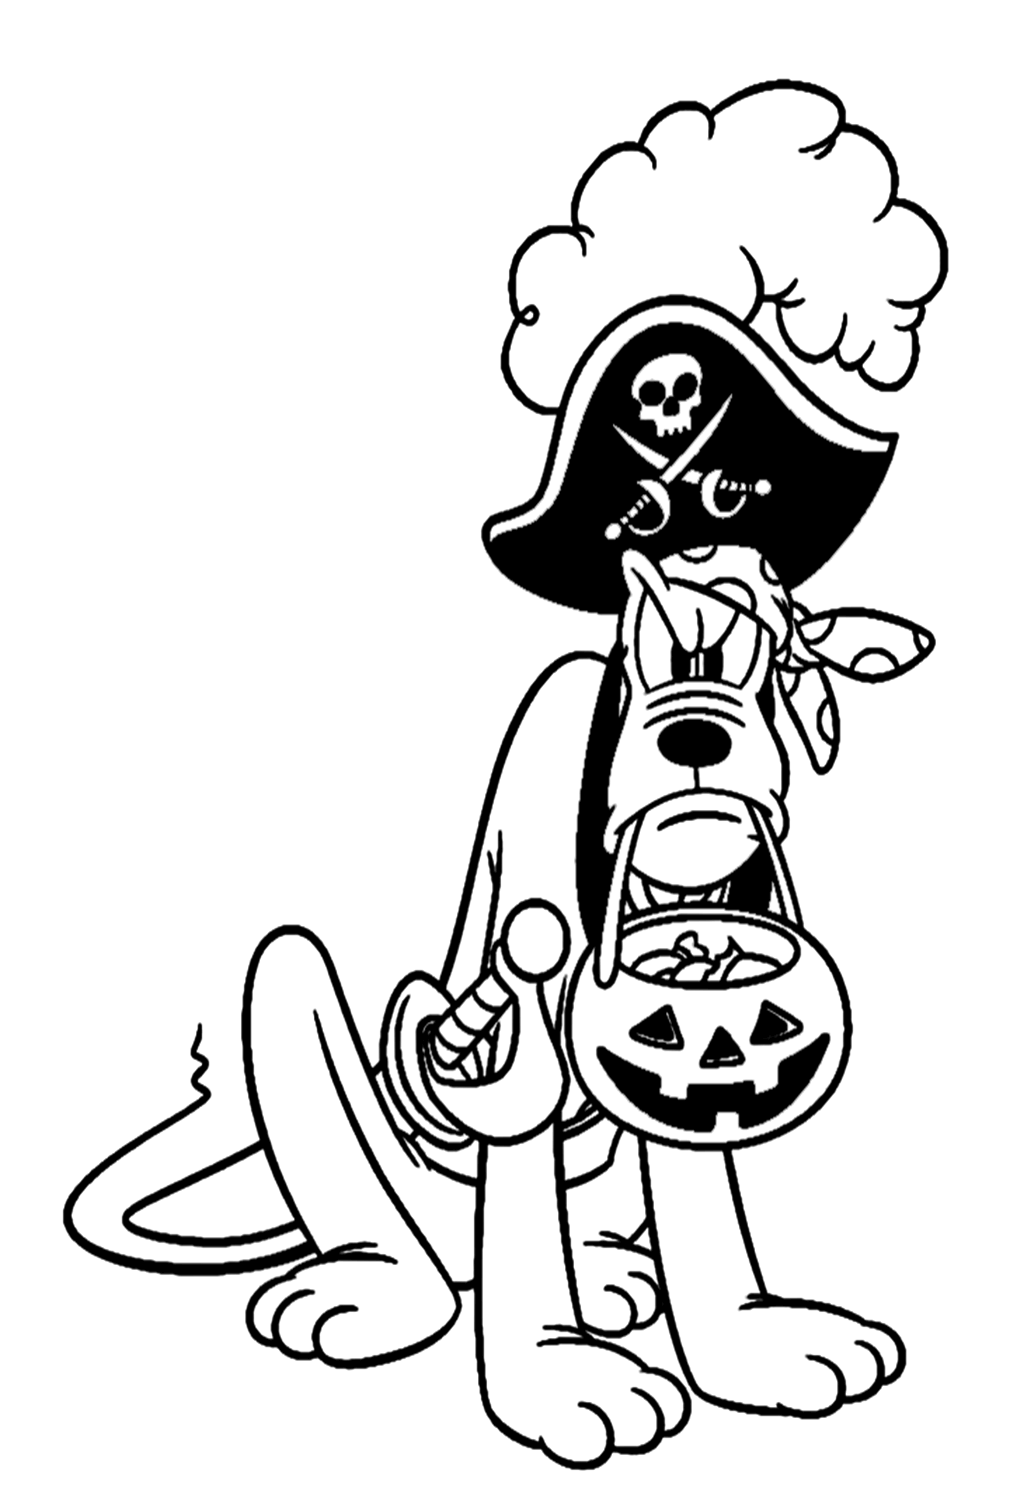 Pirate Pluto On Hallween Coloring Pages